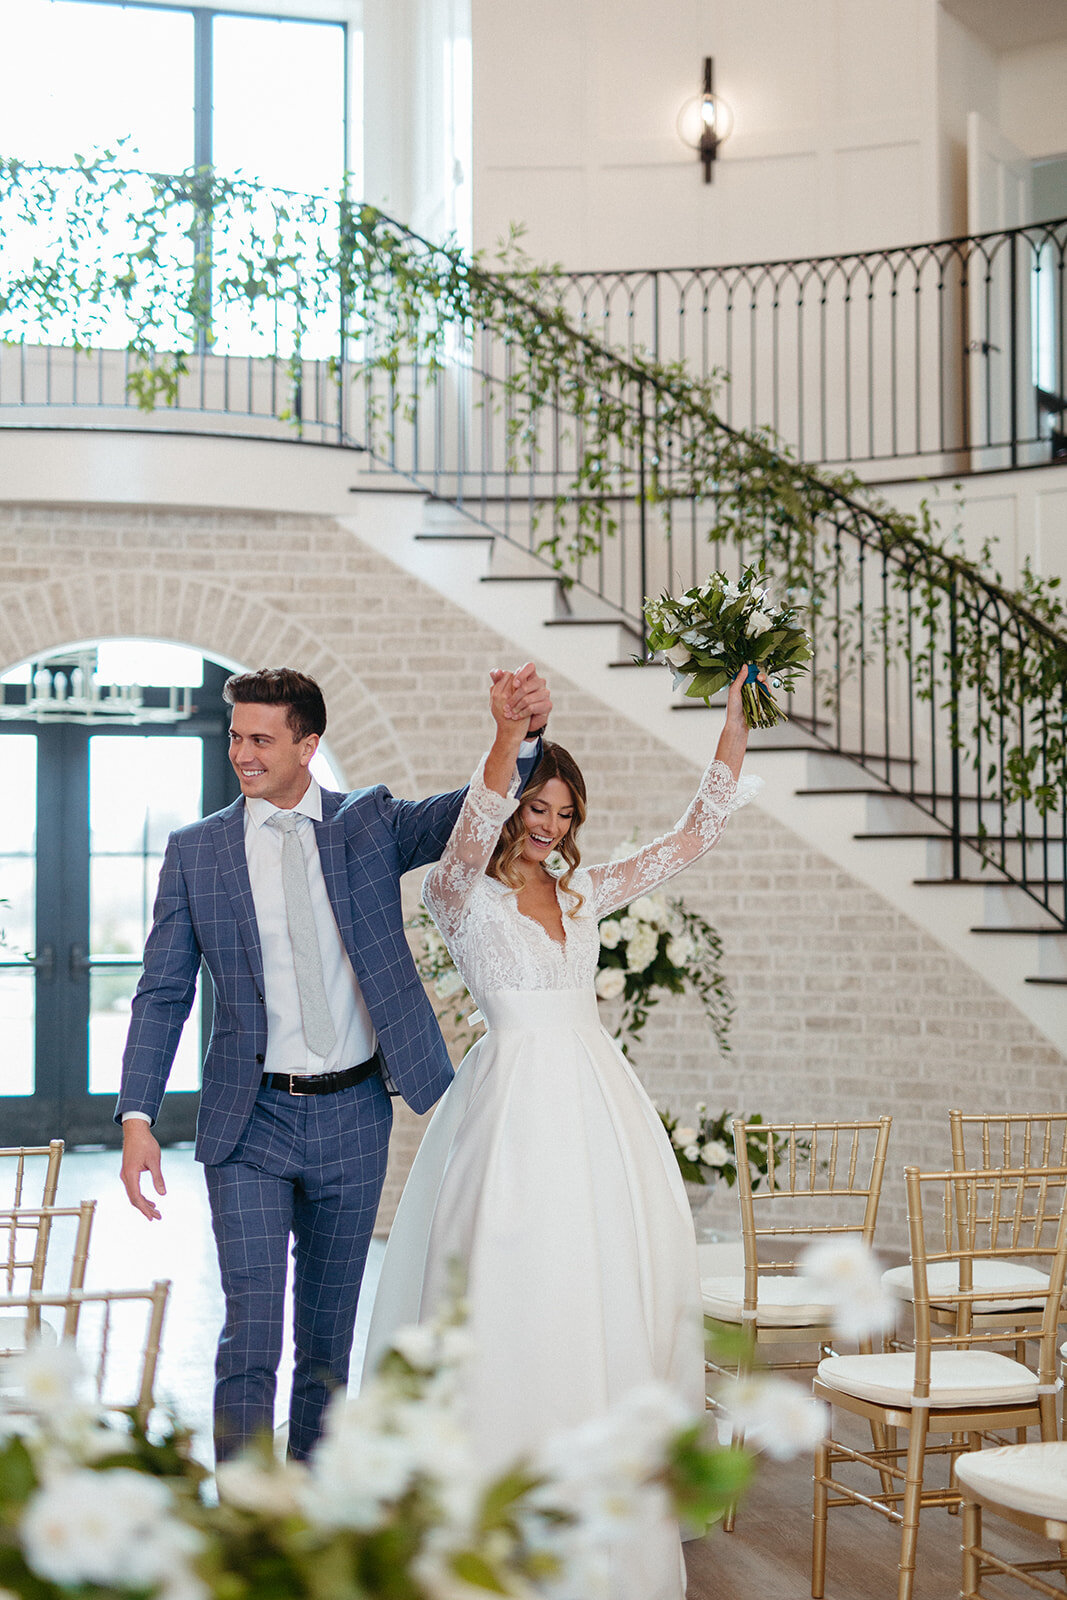 Bride and groom in a blue suit and white wedding gown walking down an aisle of gold chairs and white flowers.